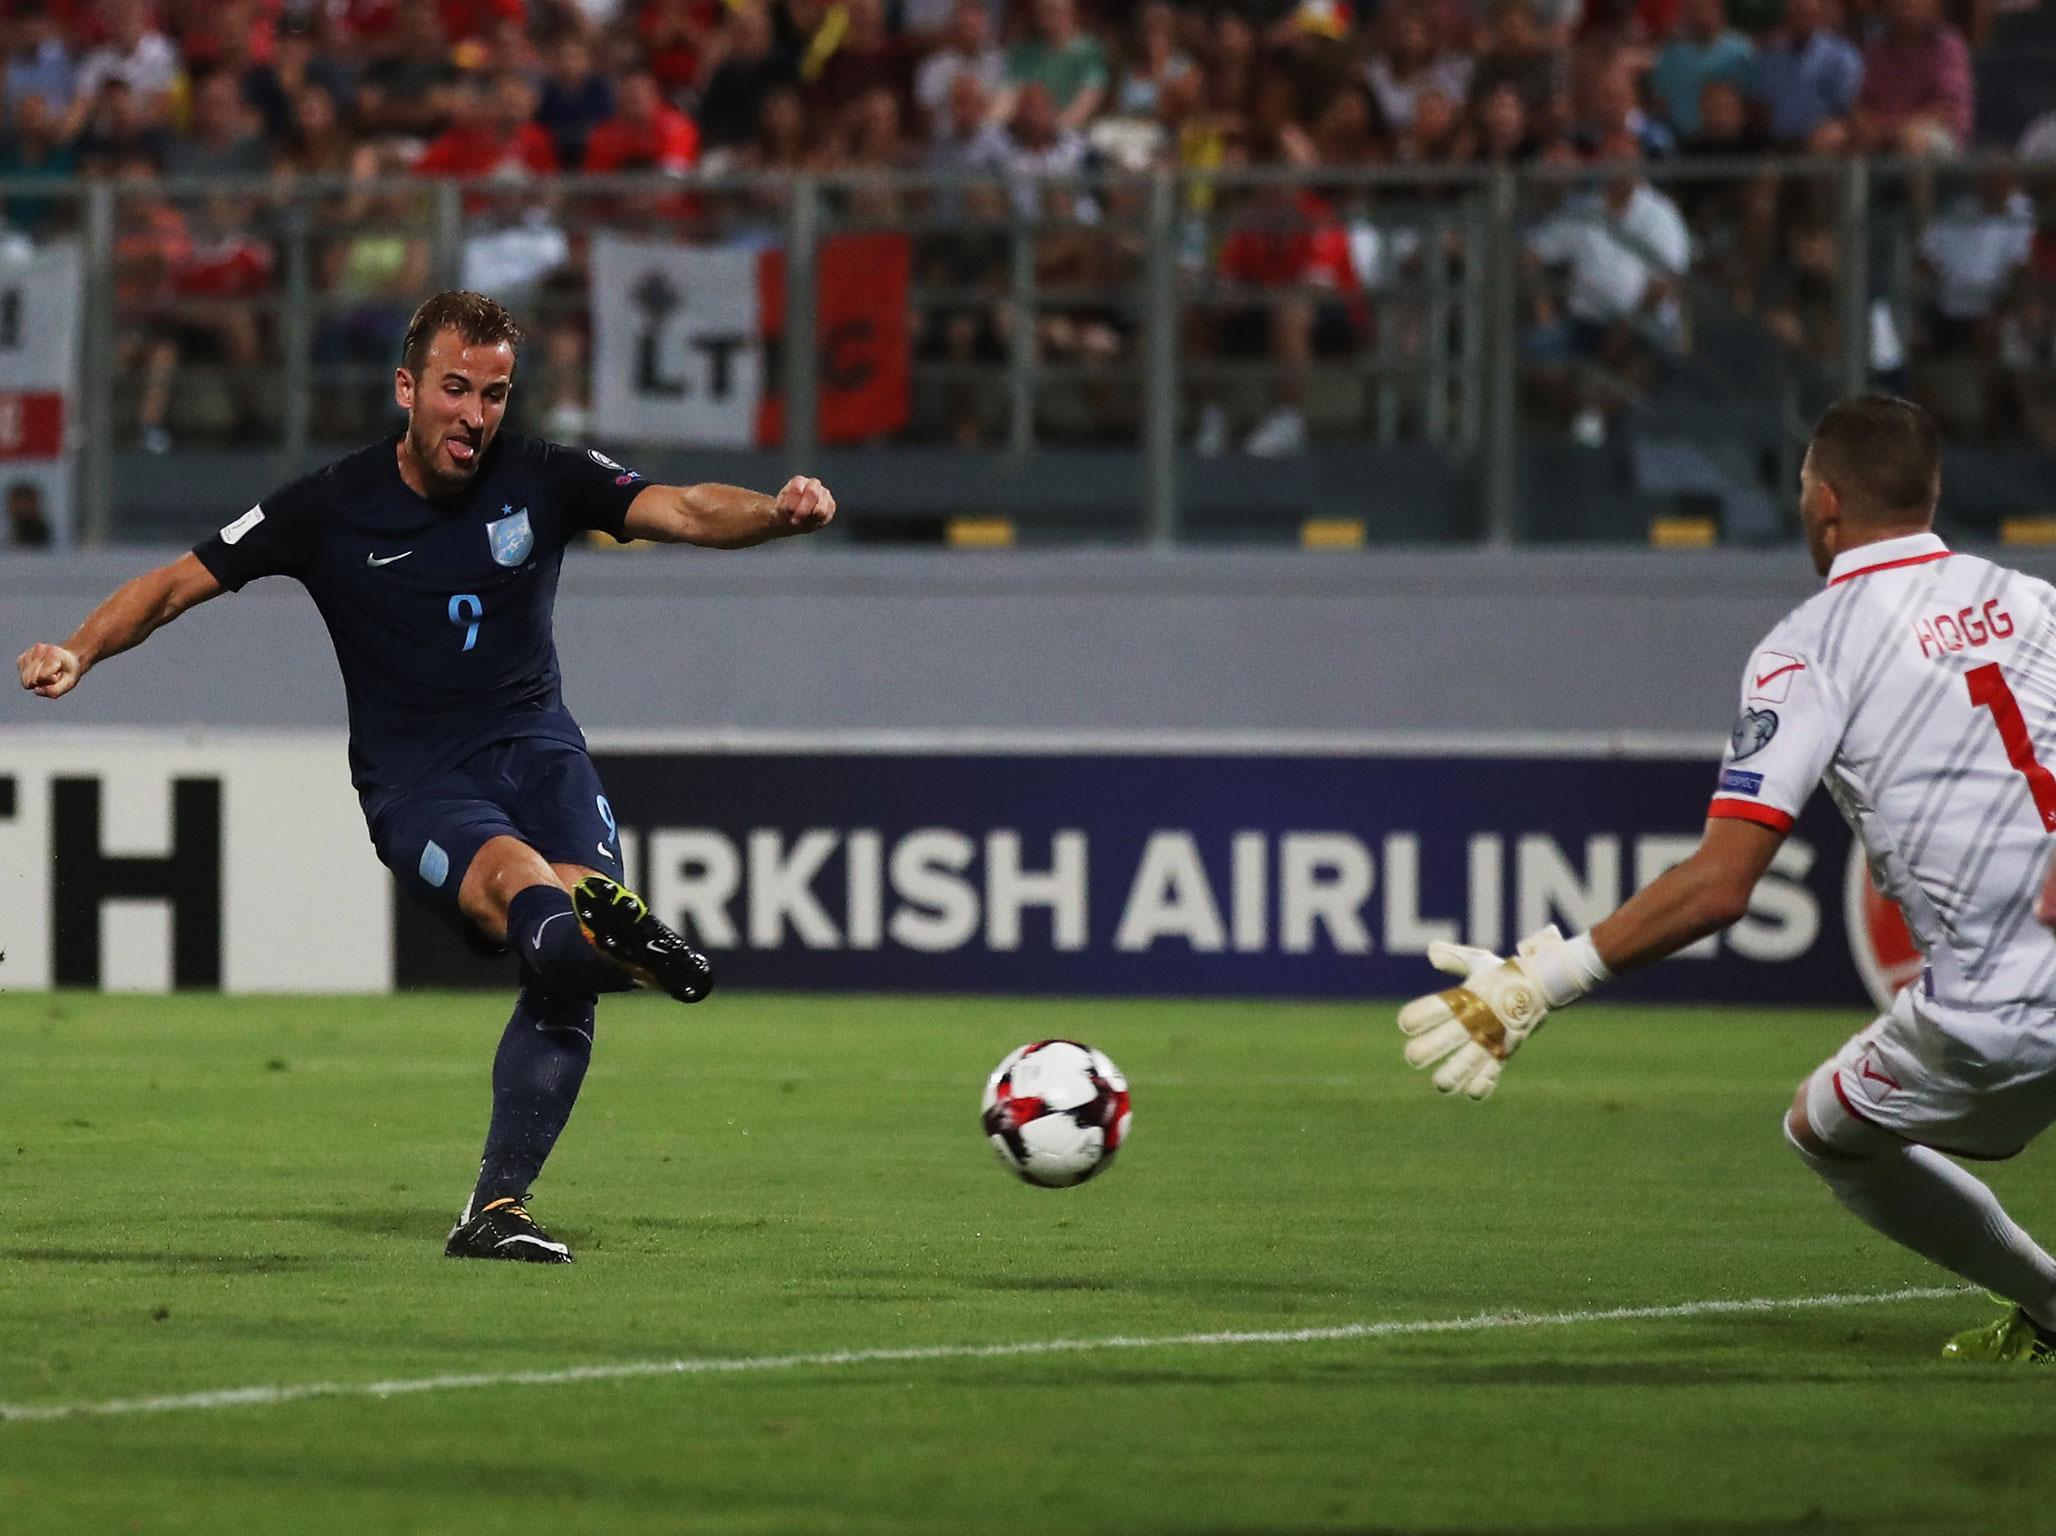 Harry Kane scored the first and last goals on a underwhelming night for England